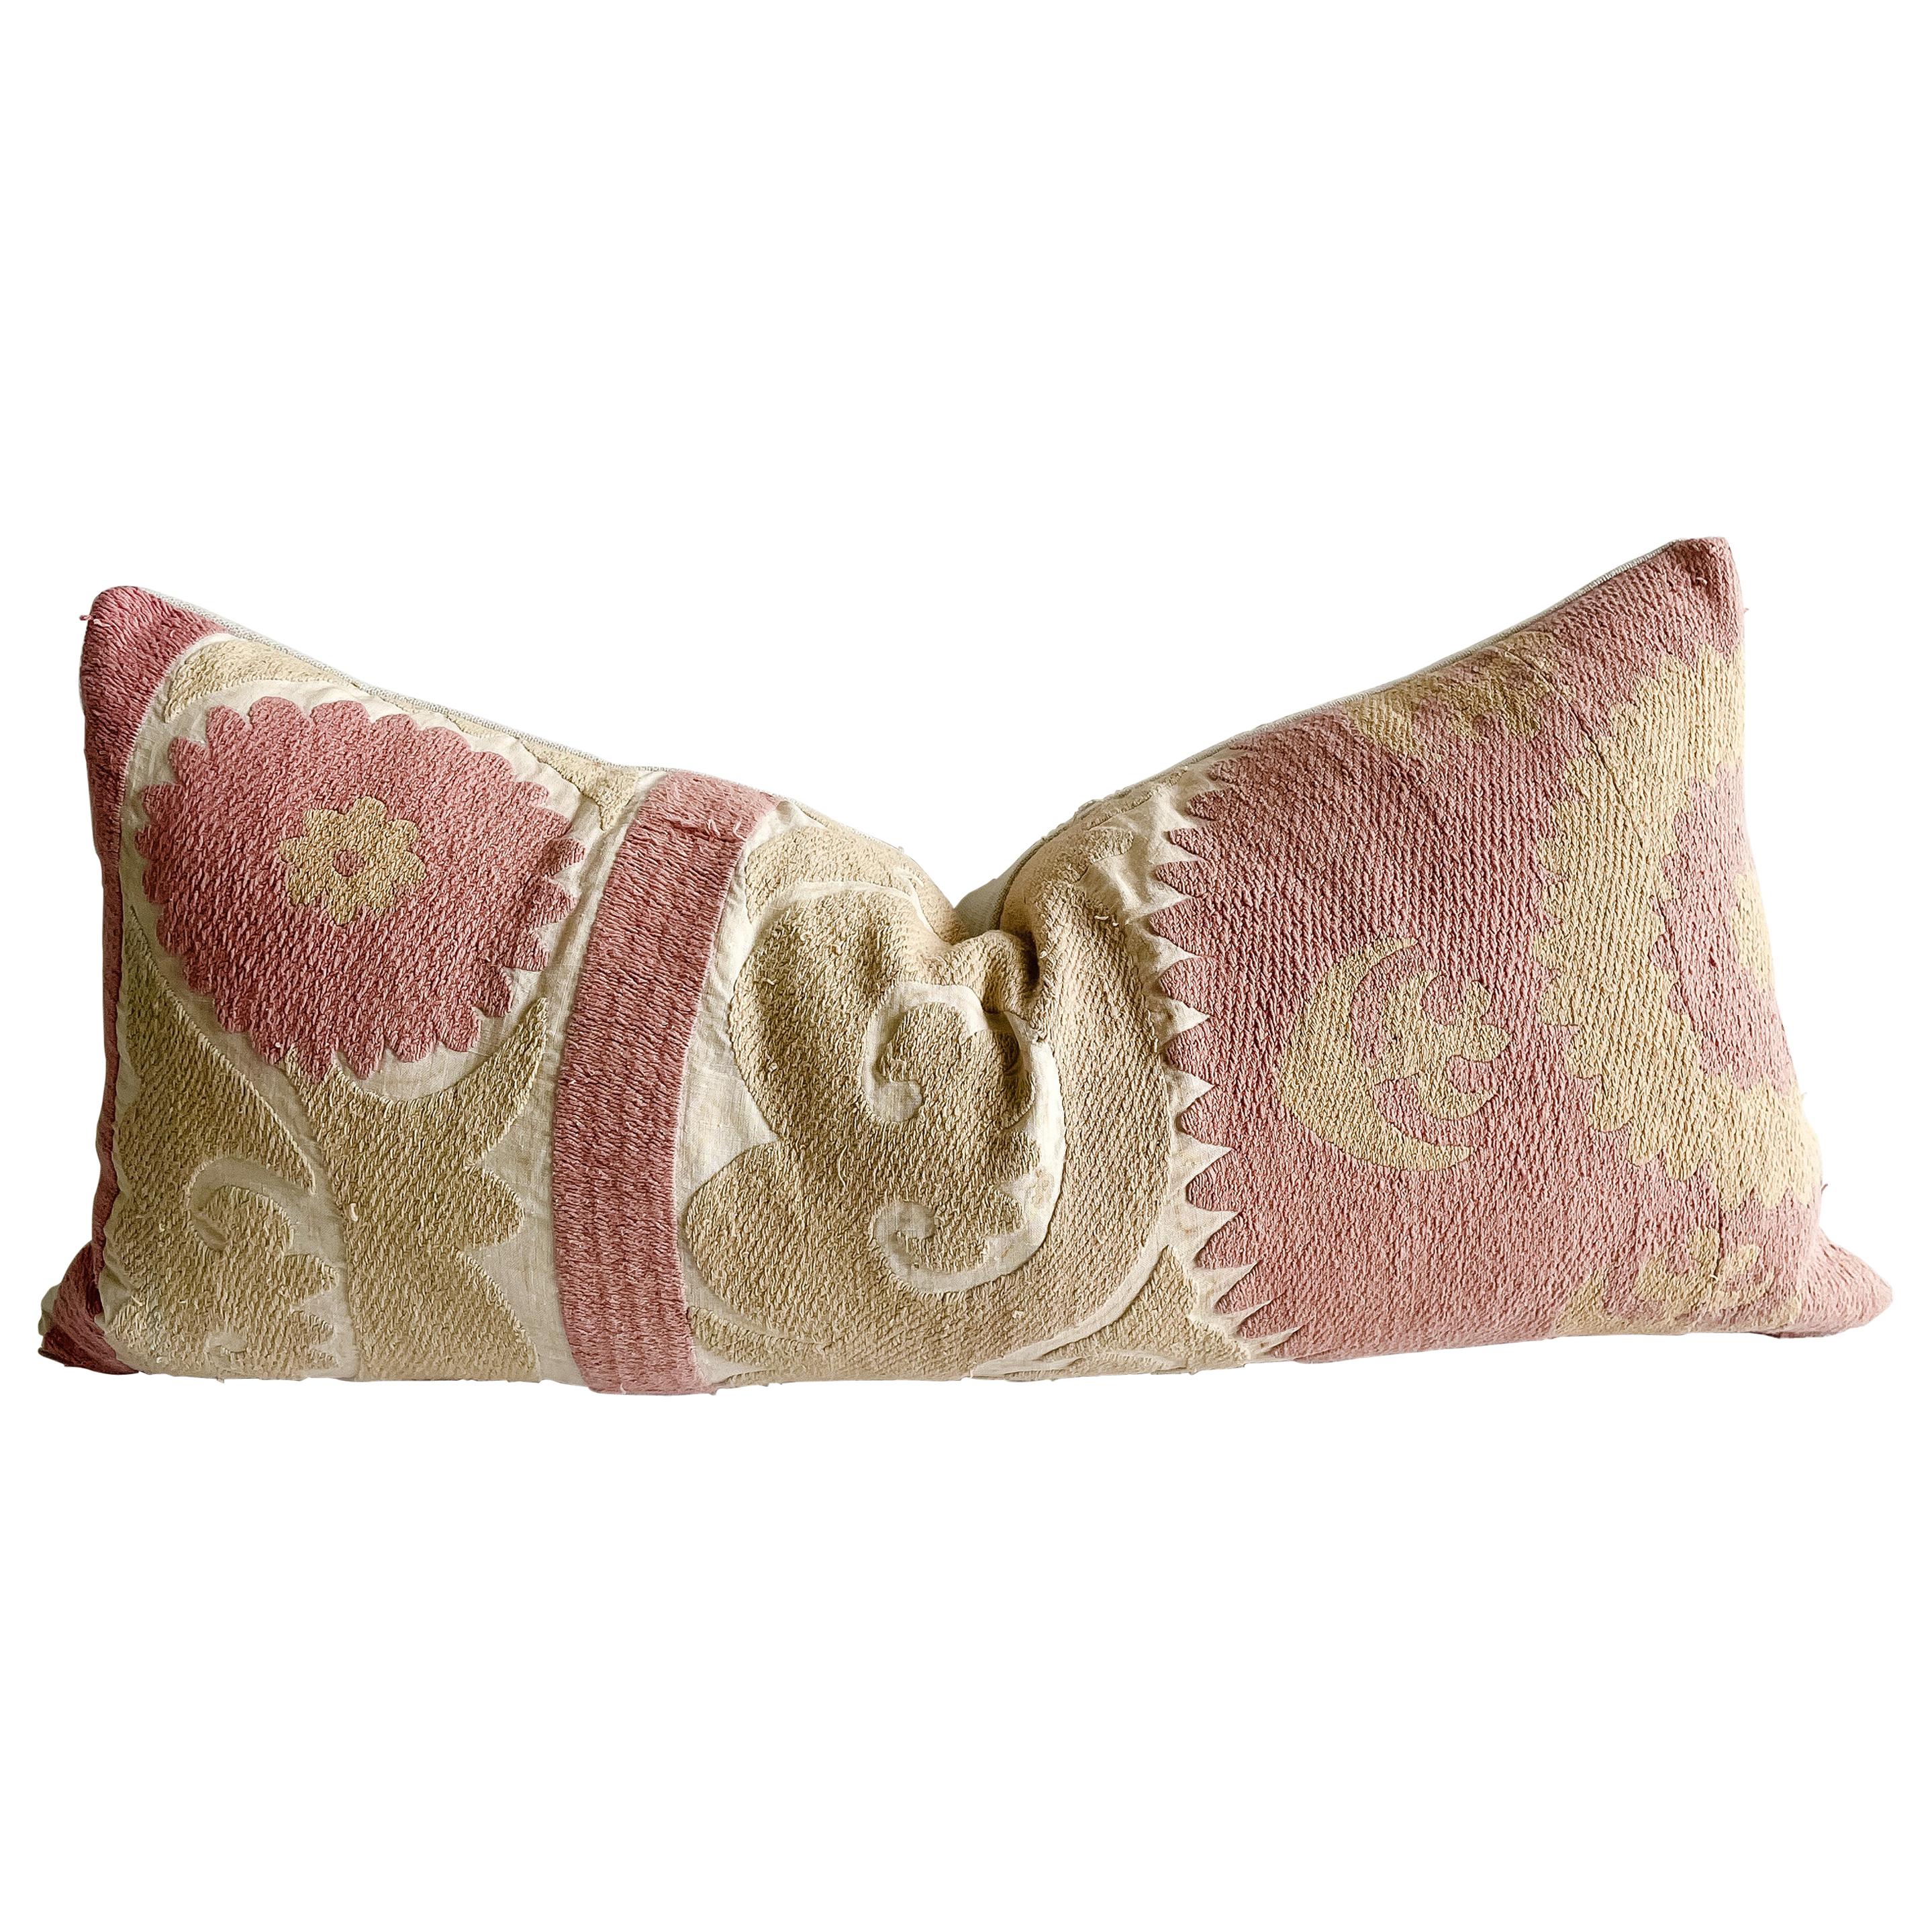 Vintage Pink and Tan Embroidered Suzani Pillow with Down Feather Insert